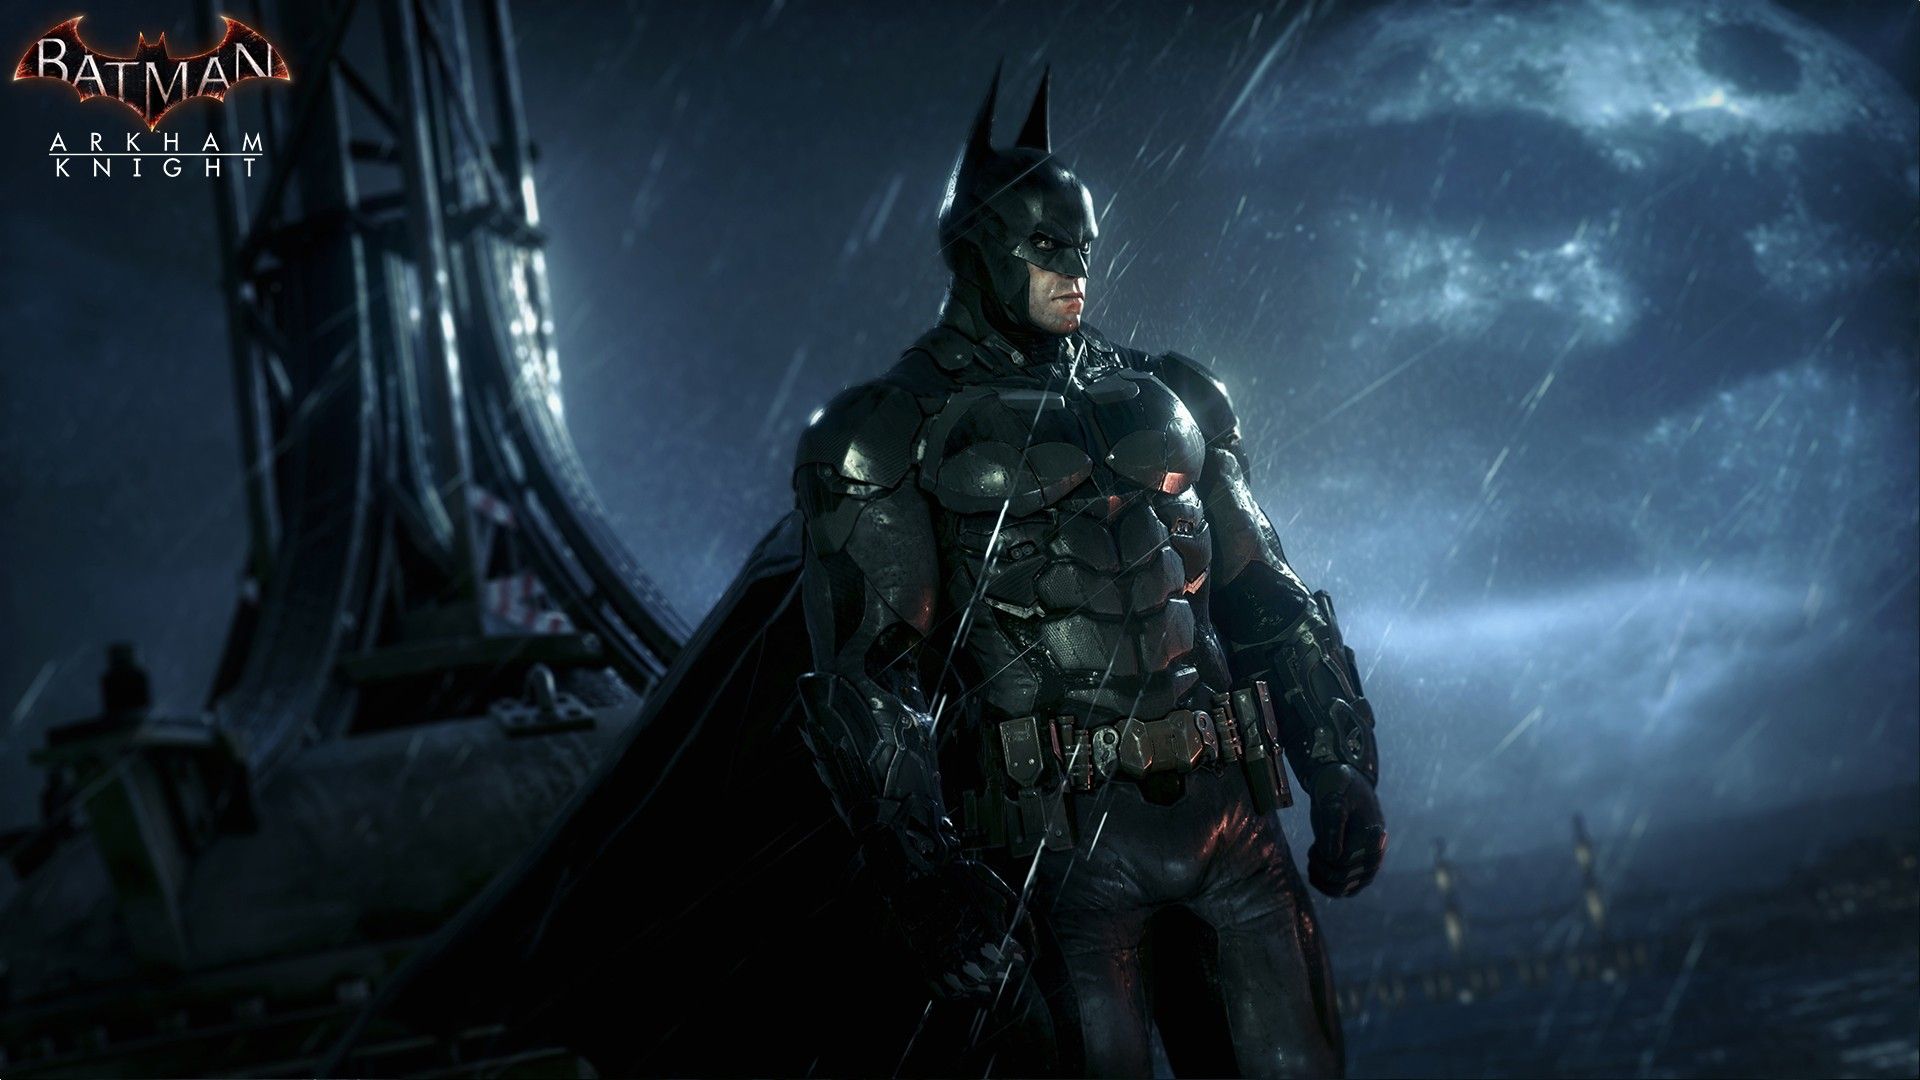 Batman Arkham Knight is already getting lots of negative reviews on Steam  due to the poor performance on PC. : r/Games